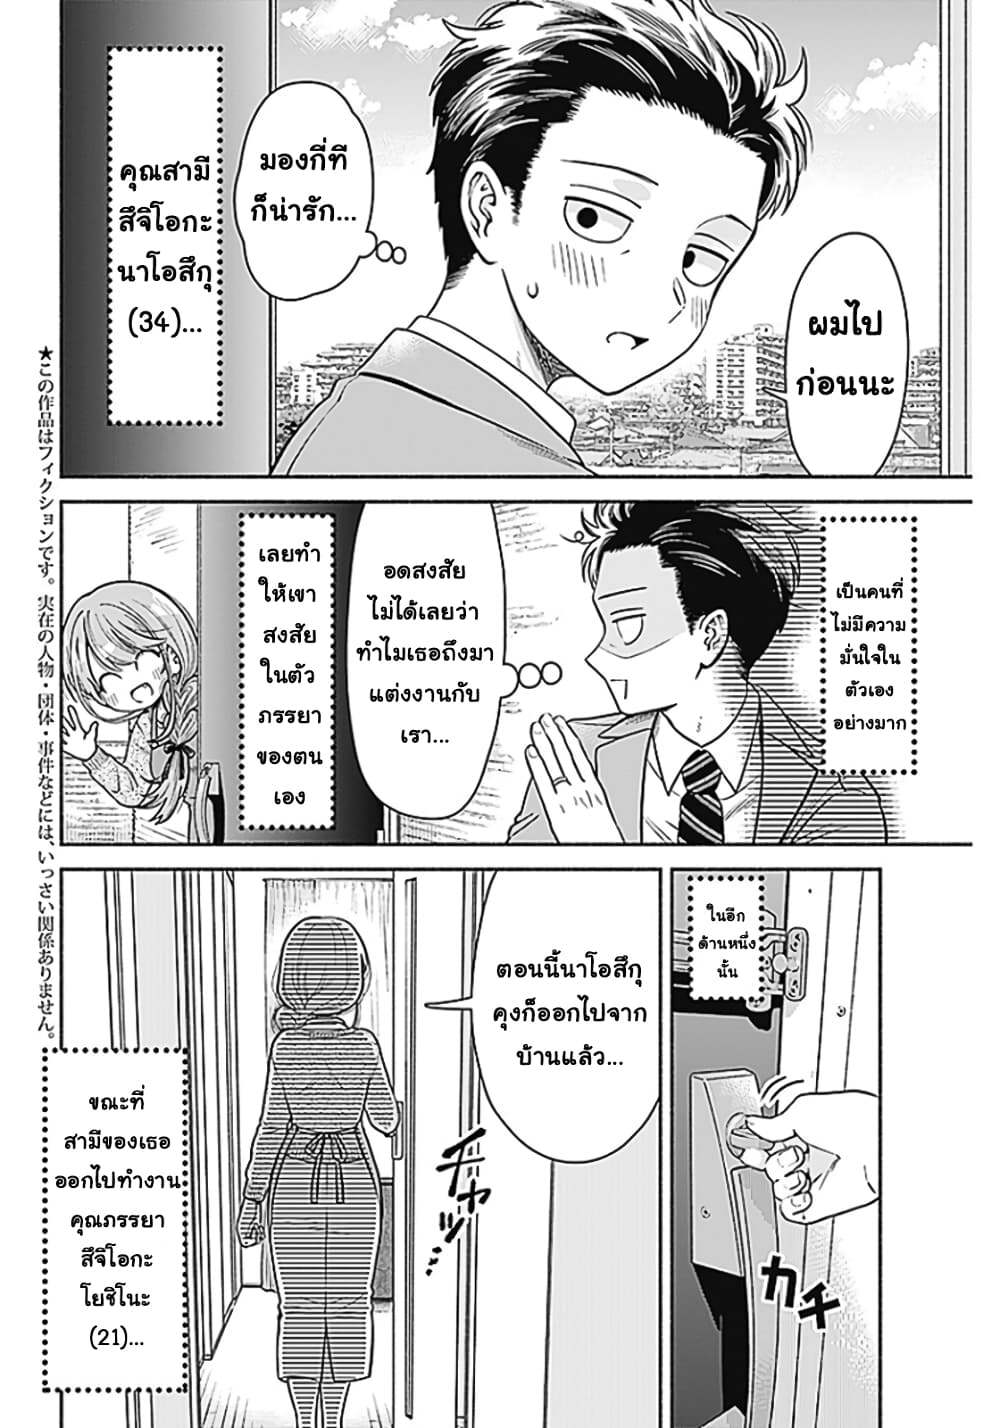 Marriage Gray 2-2